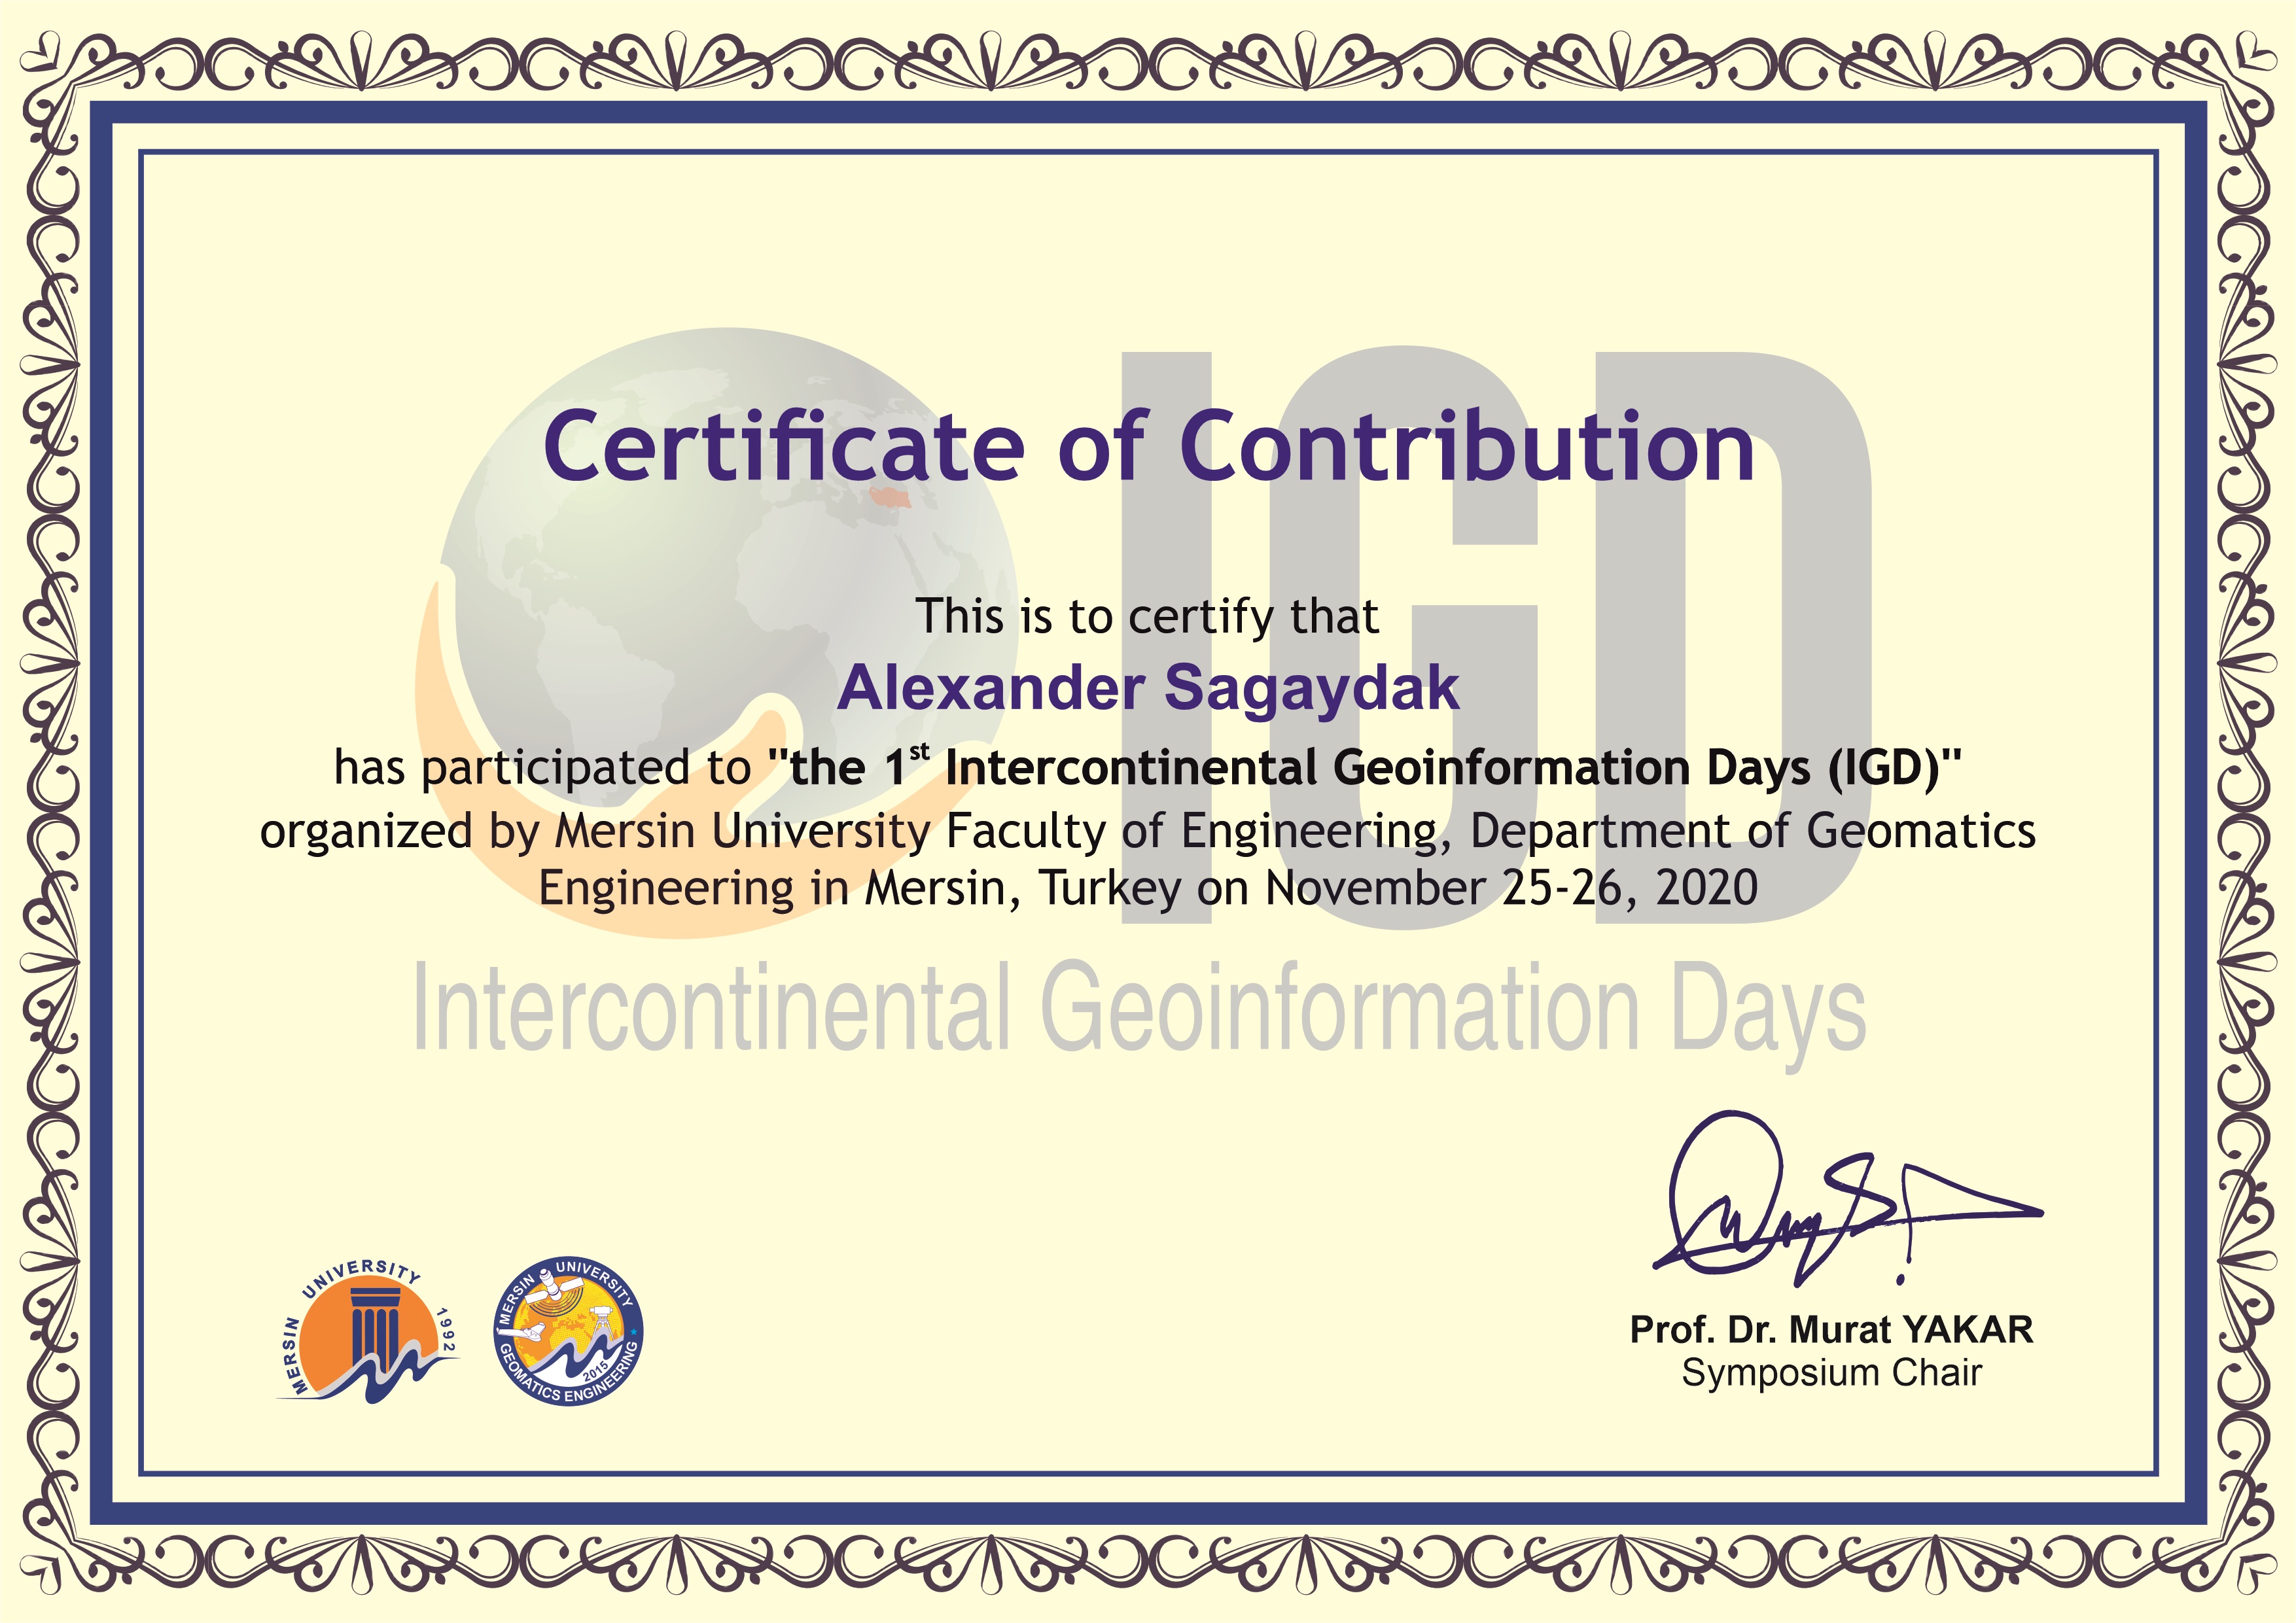 Professor Alexander Sagaydak has participated to the First Intercontinental Geoinformation Days (IGD) organized by Mersin University Faculty of ...